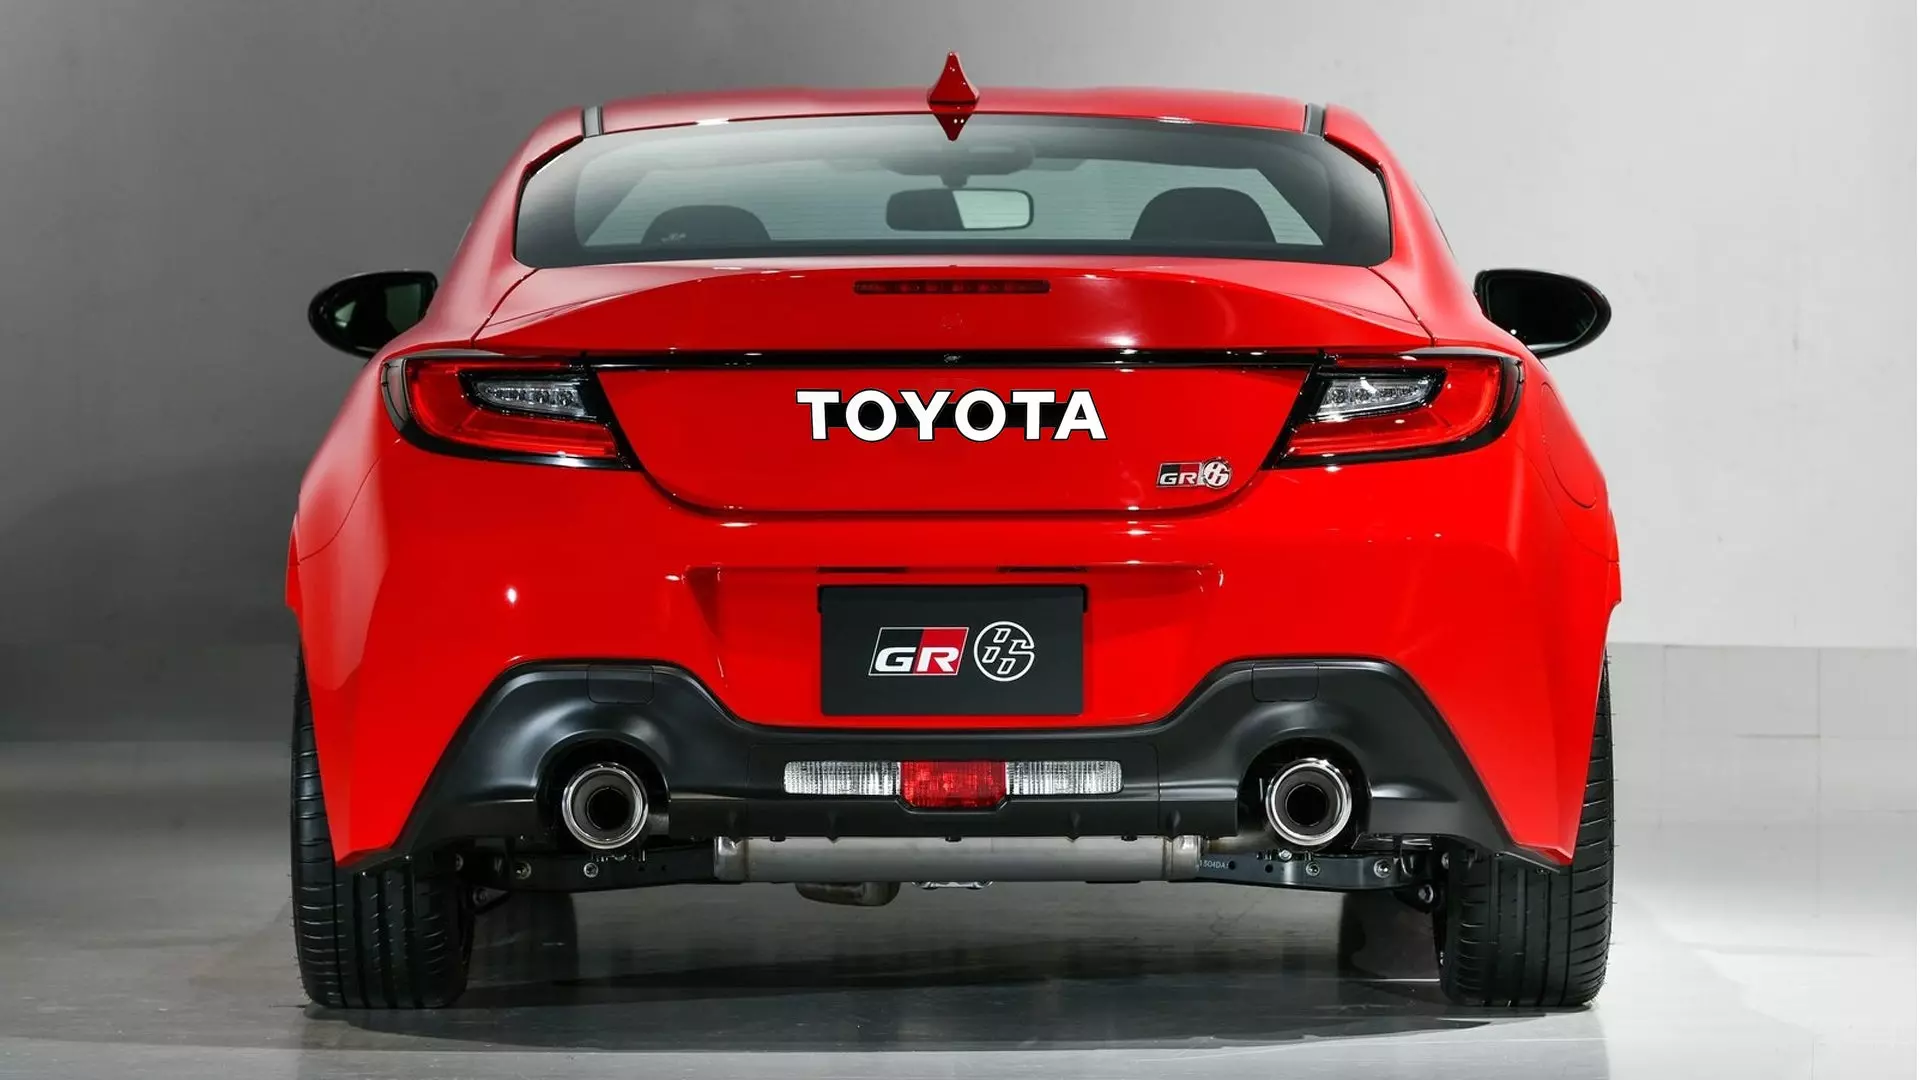 There’s Only One Thing I Would Change About the New Toyota GR86 Design